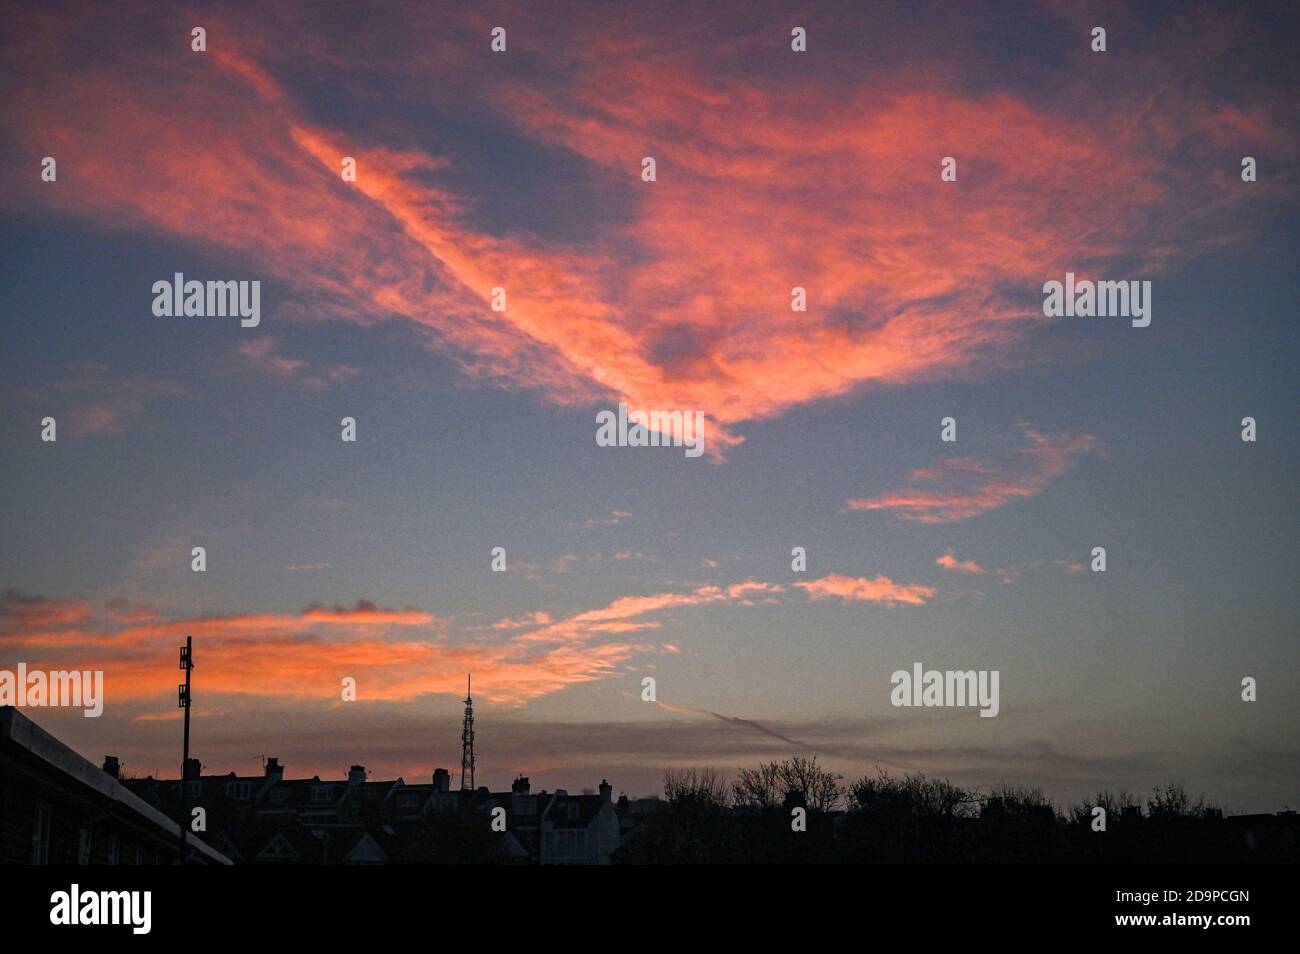 Brighton UK 7th November 2020 - The sun rises over the Whitehawk Hill transmitting station mast in East Brighton this morning . The Whitehawk Transmitting Station is a broadcasting and telecommunications facility  and is the city's main transmission facility for television and radio signals : Credit Simon Dack / Alamy Live News Stock Photo